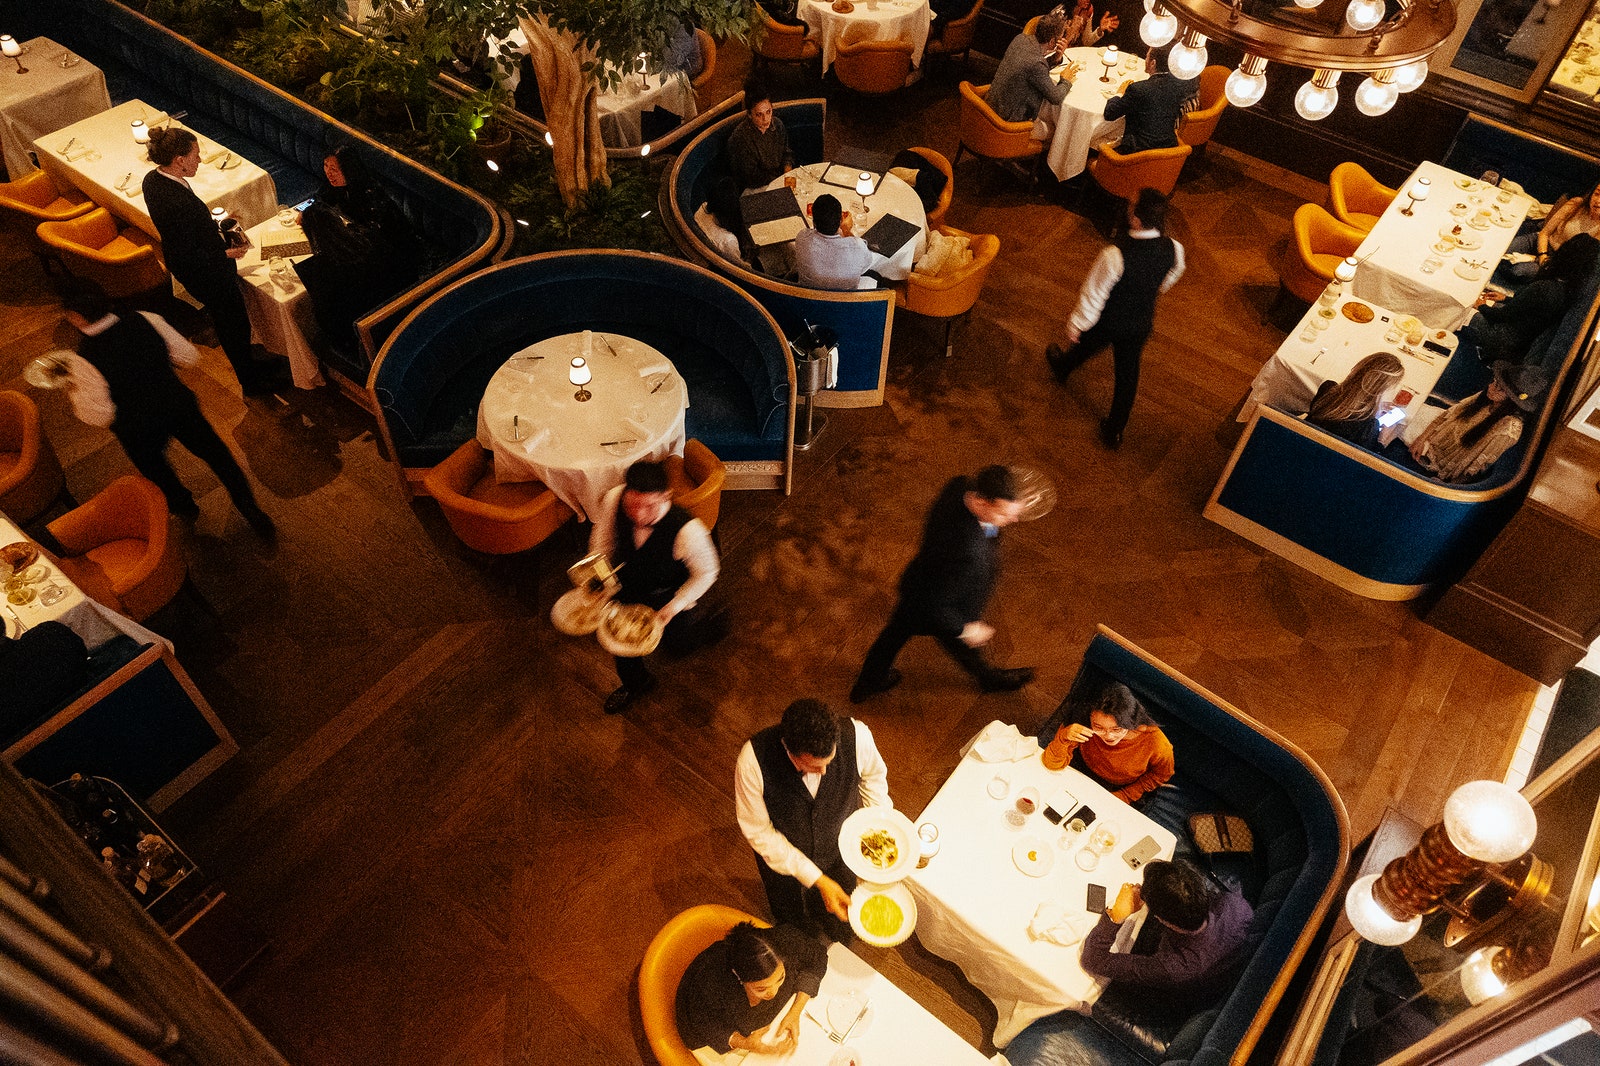 An overhead shot of the dining room of the restaurant with servers in formal wear.